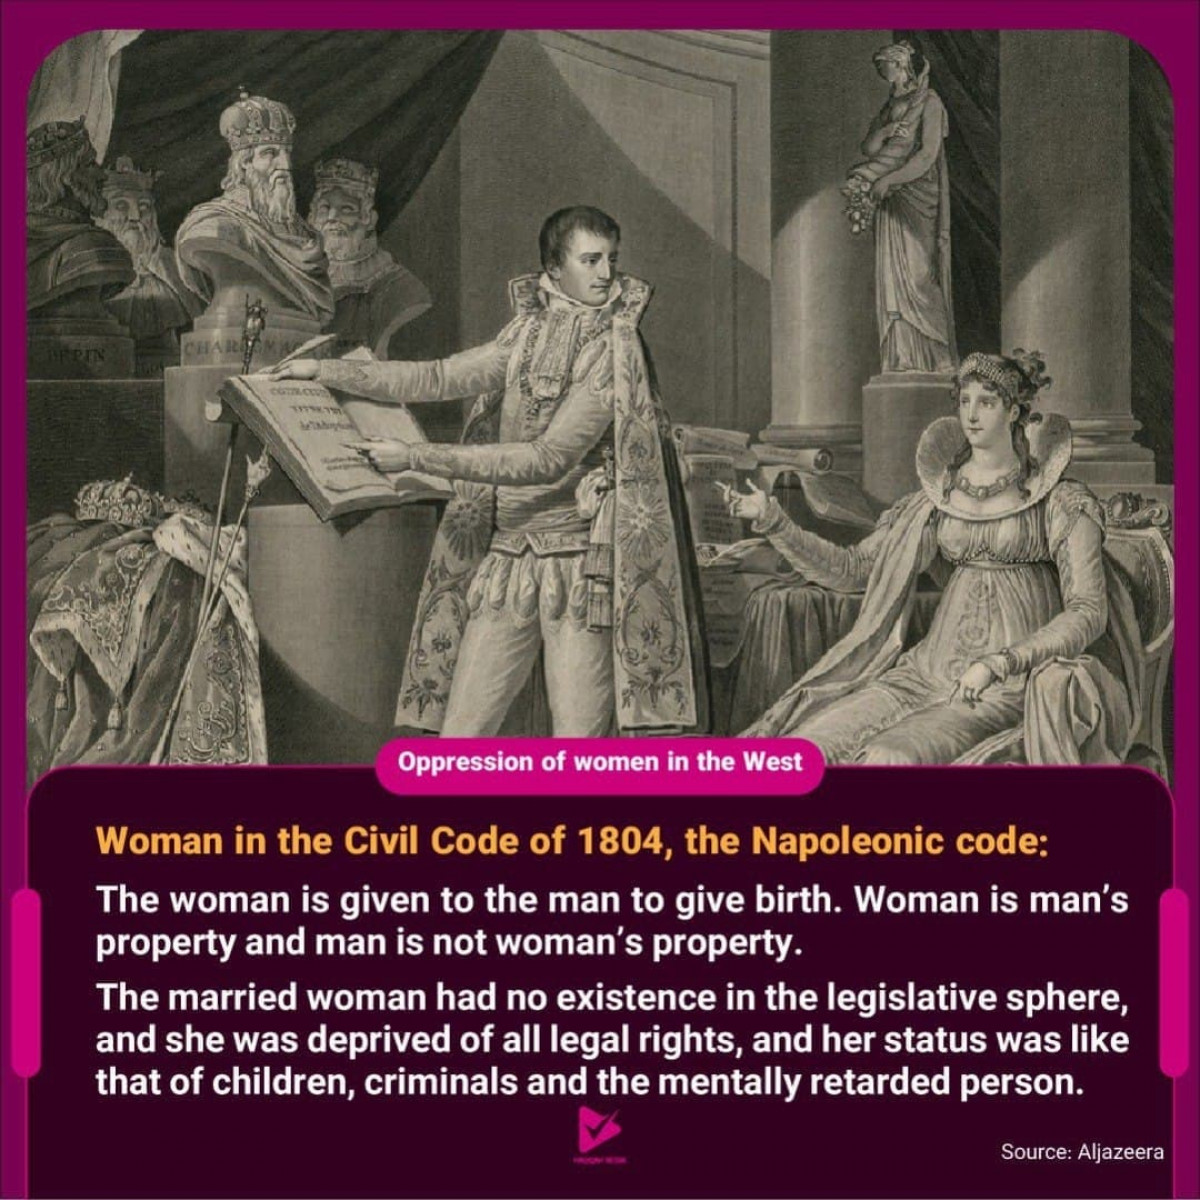 Woman in the Civil Code of 1804, the Napoleonic code